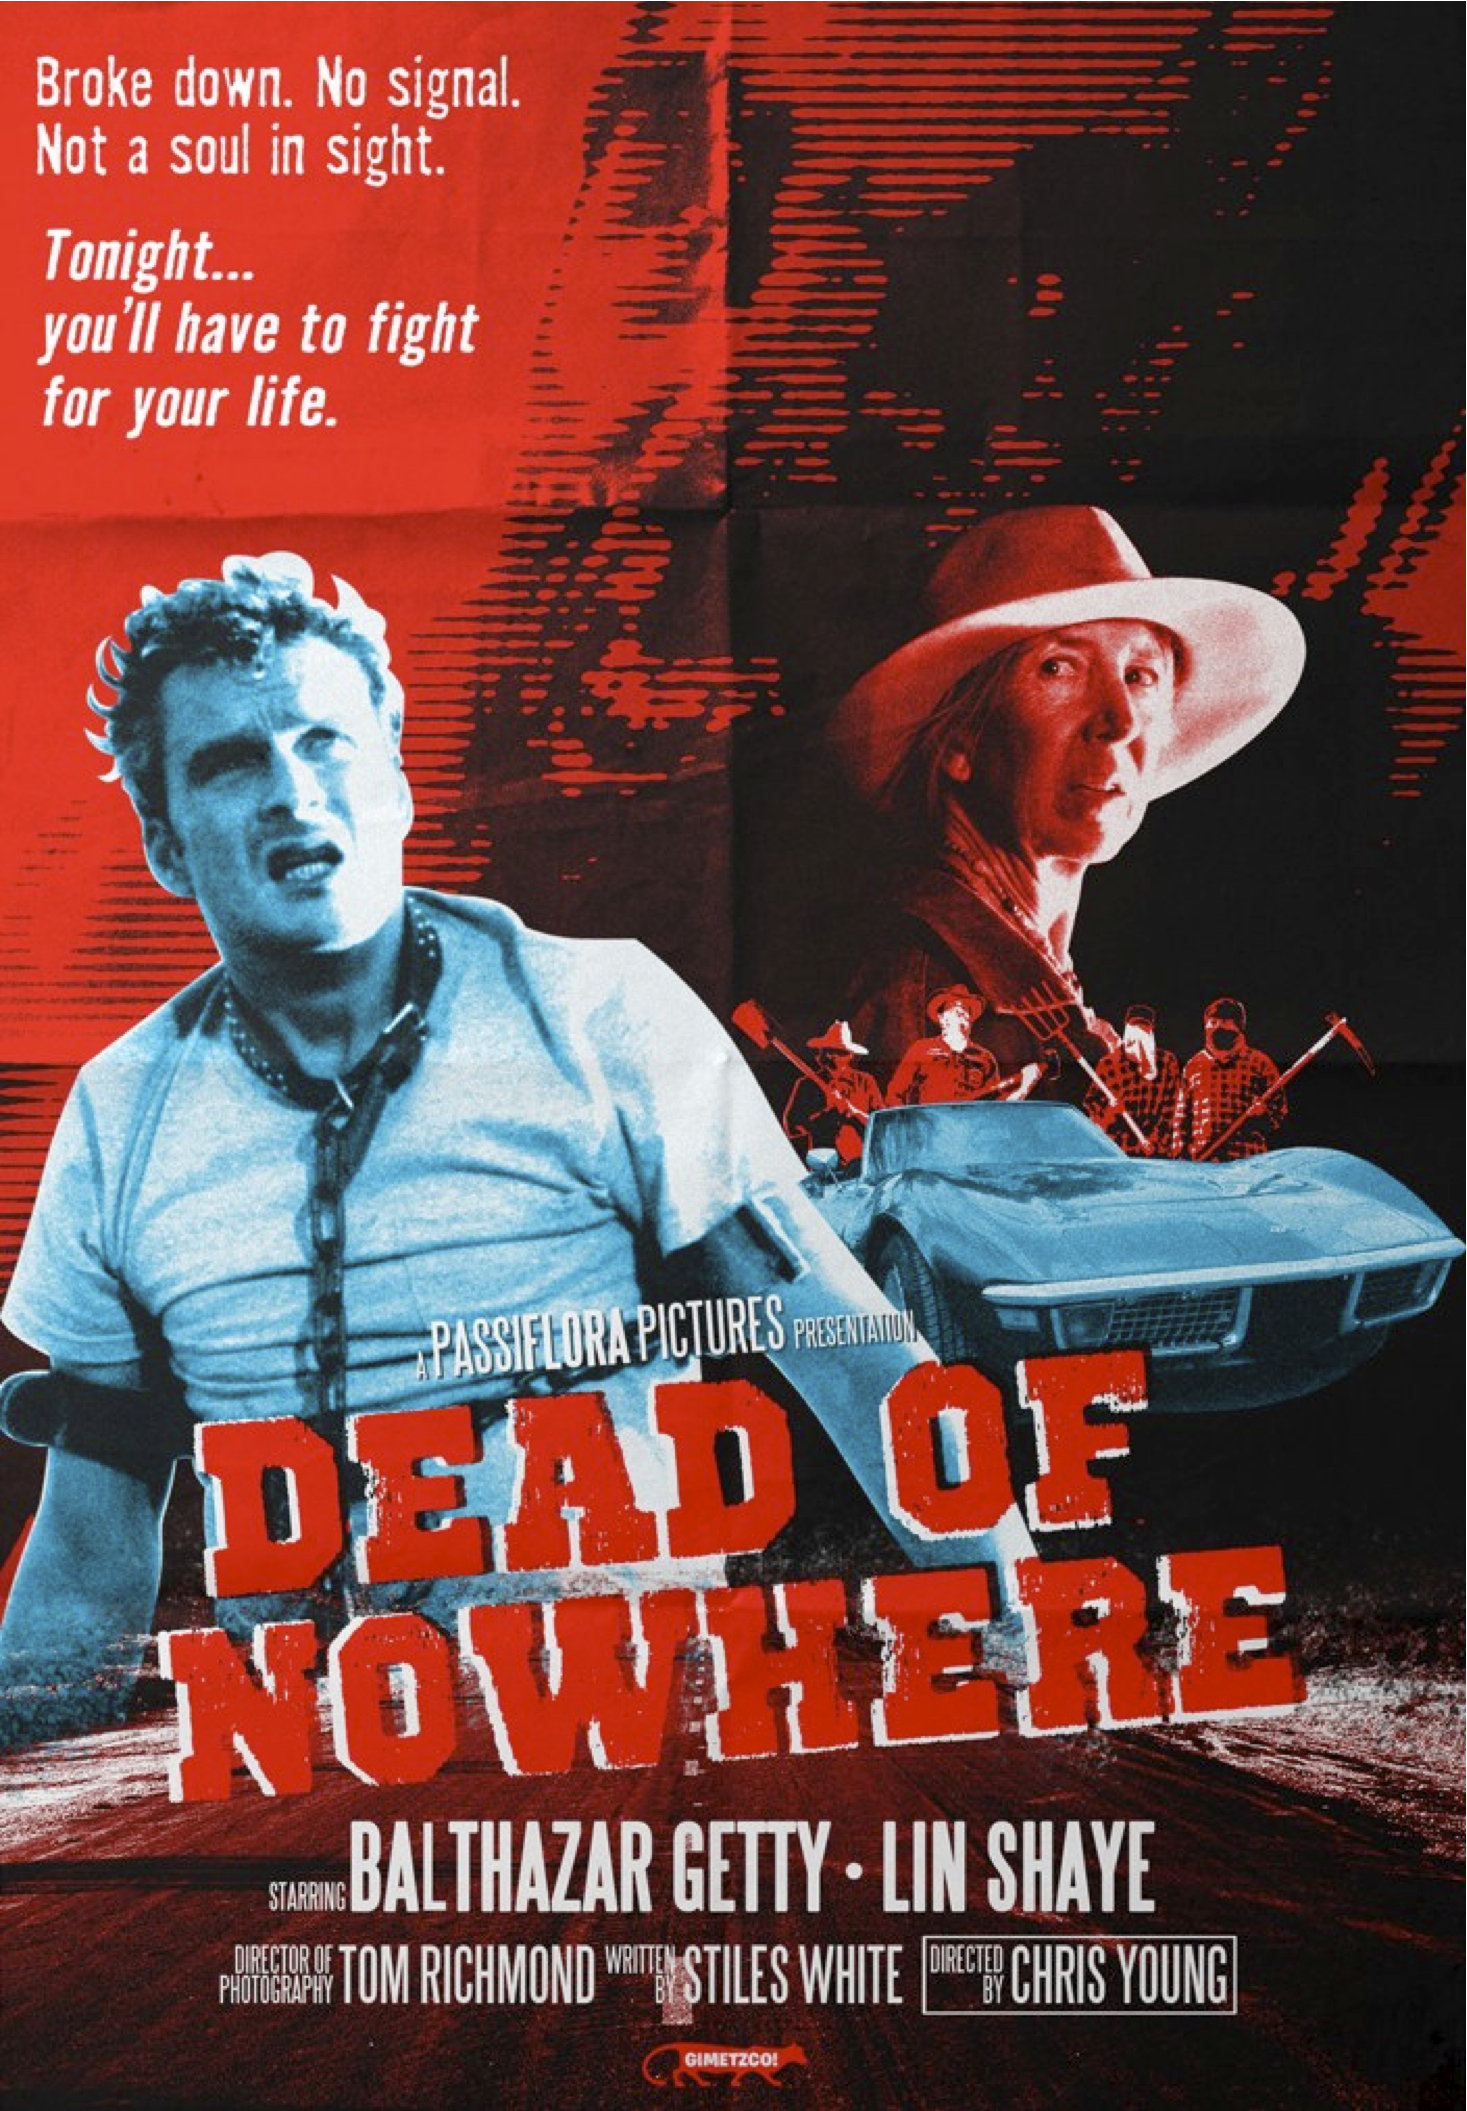 Balthazar Getty, Lin Shaye, Keith Coogan, Lea Moreno, Stiles White, Chris Young and Douglas Tait in Dead of Nowhere 3D (2011)